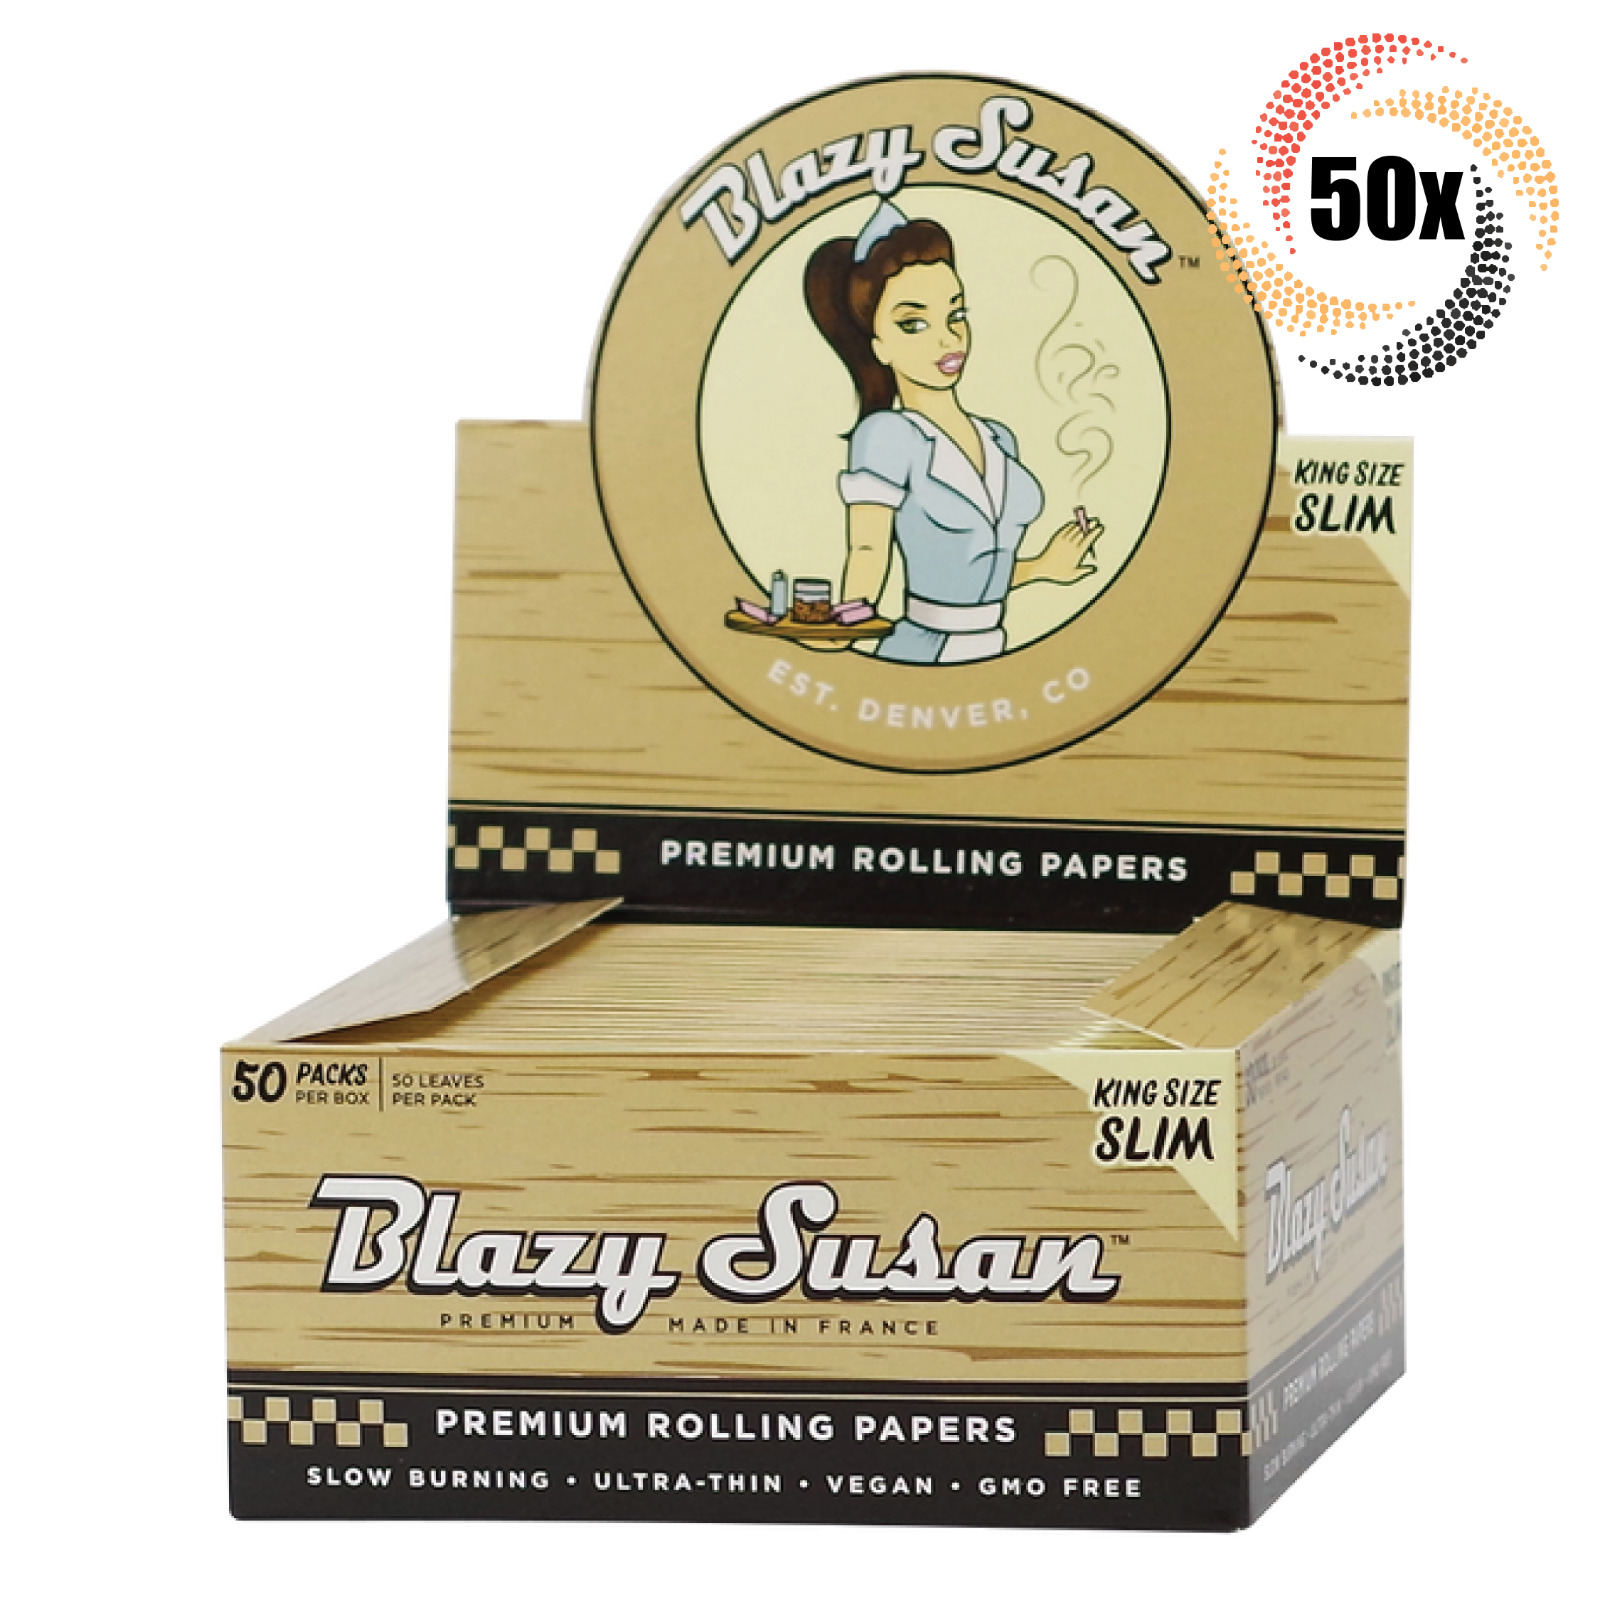 Full Box 50x Packs Blazy Susan Unbleached King Slim Rolling Papers | 50 Per Pack